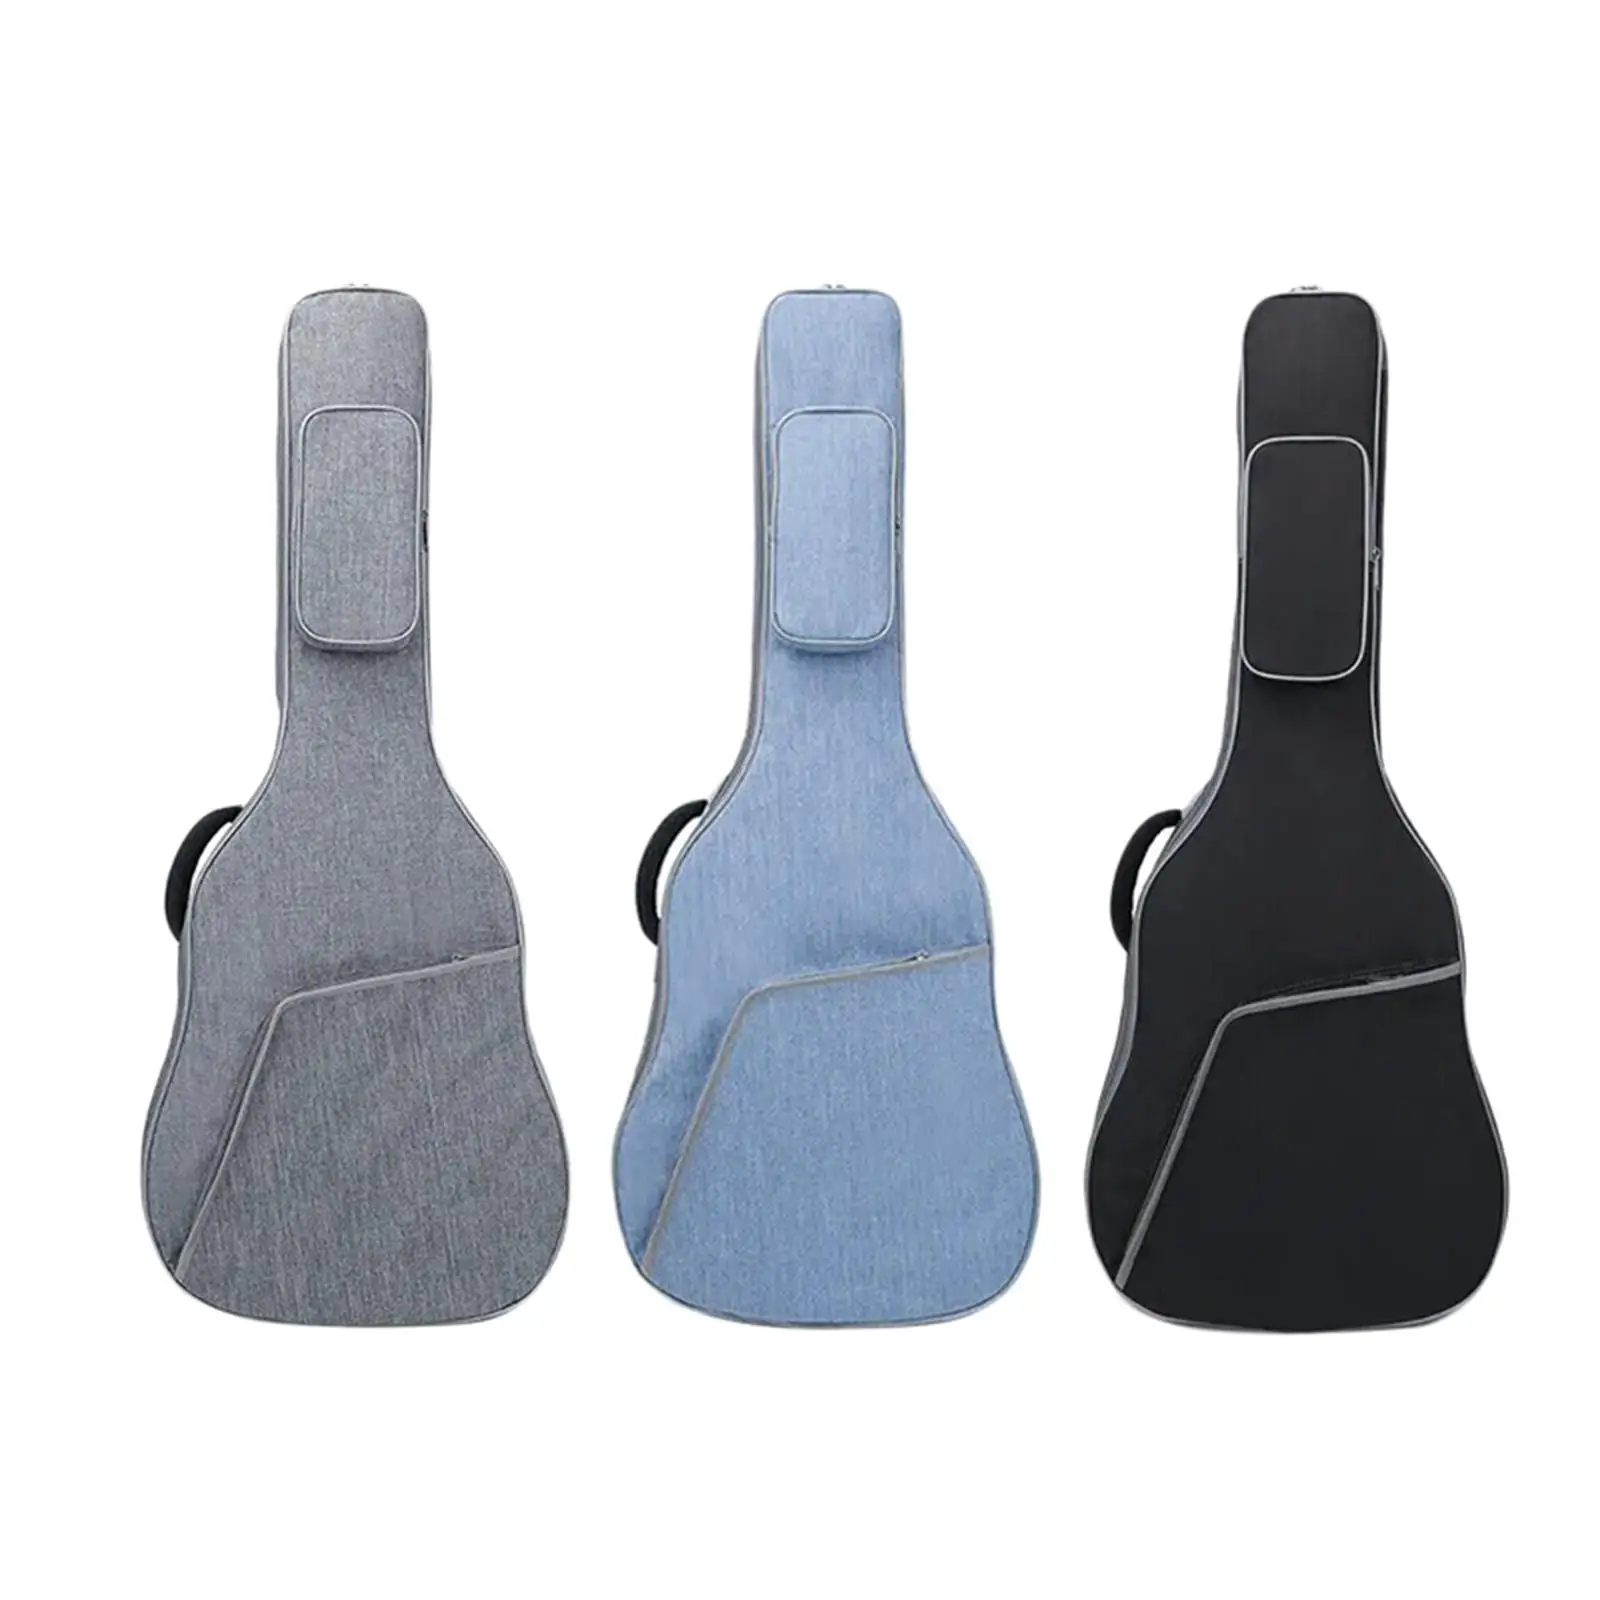 Guitar Case 41in Guitar Dust Cover Bag for Electric Guitars Acoustic Guitars